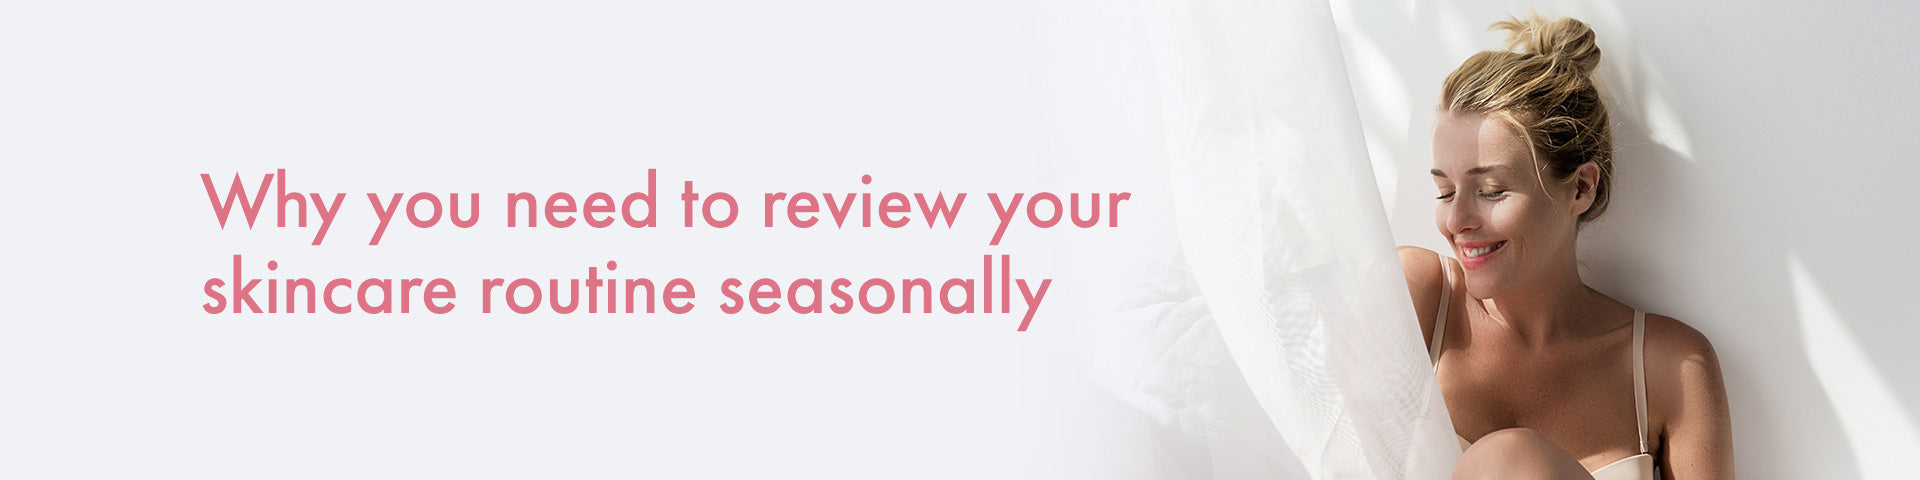 Why You Need to Review Your Skincare Routine Seasonally